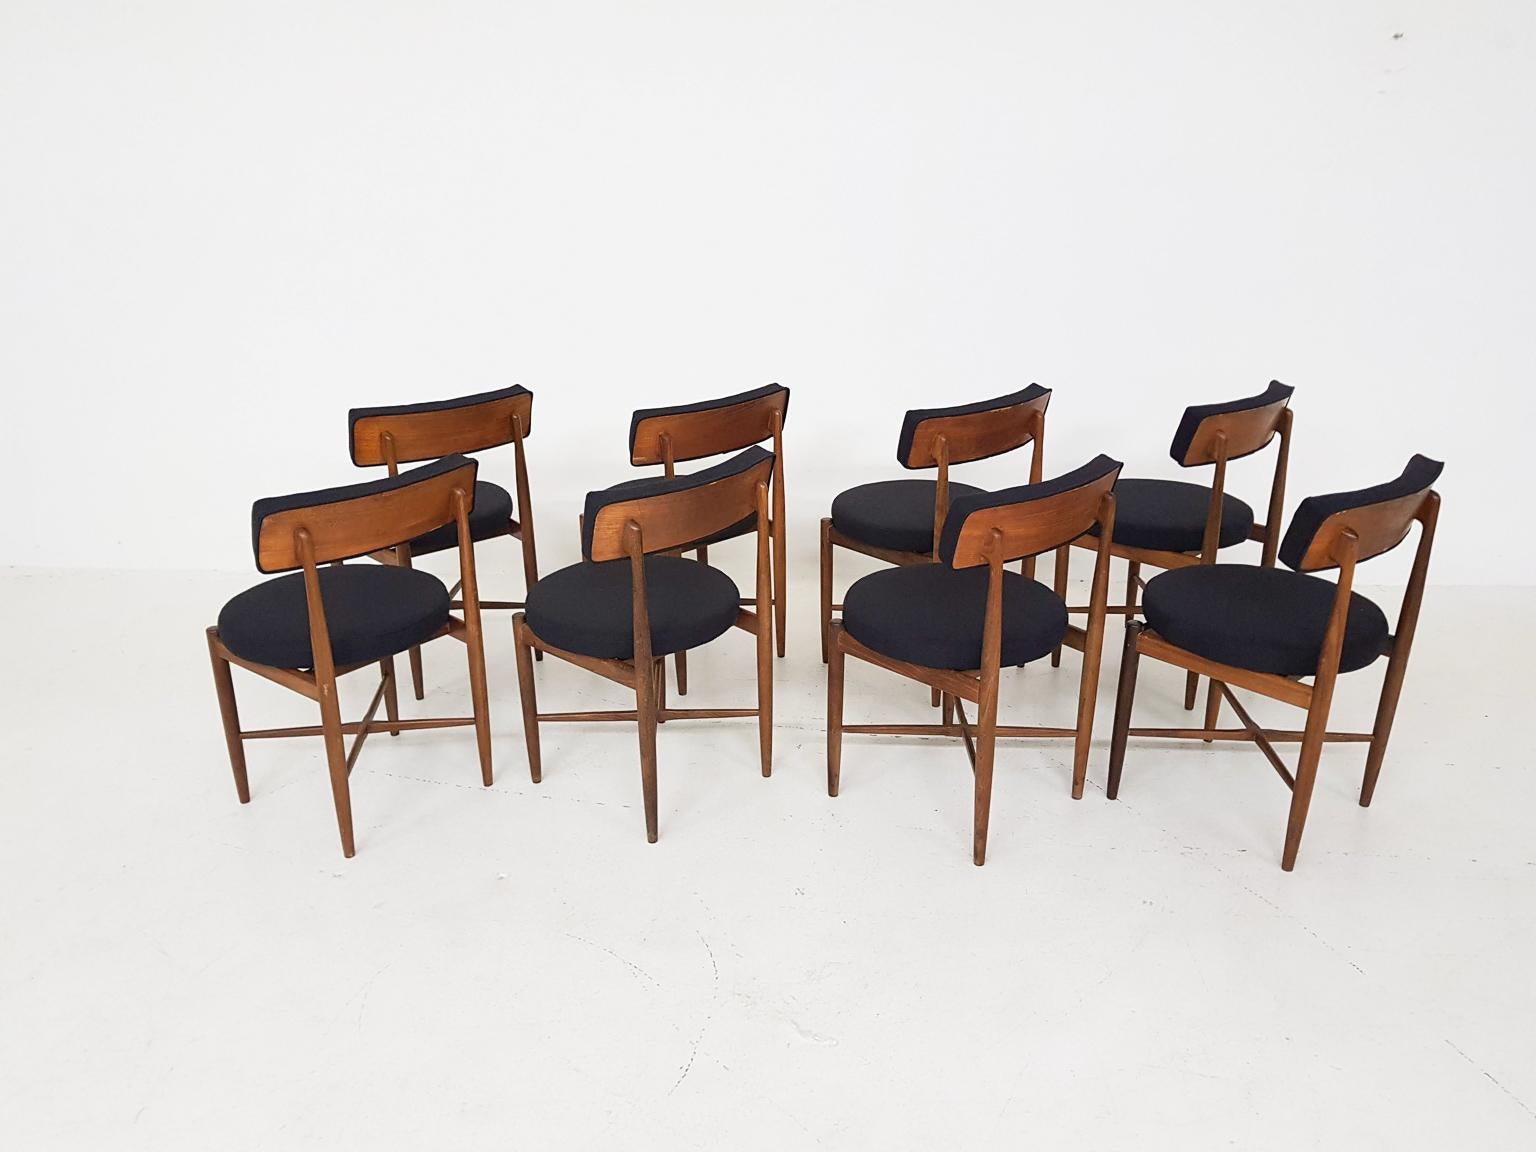 British Set of 8 Victor Wilkins Teak Dining Chairs for G-plan, United Kingdom, 1960s